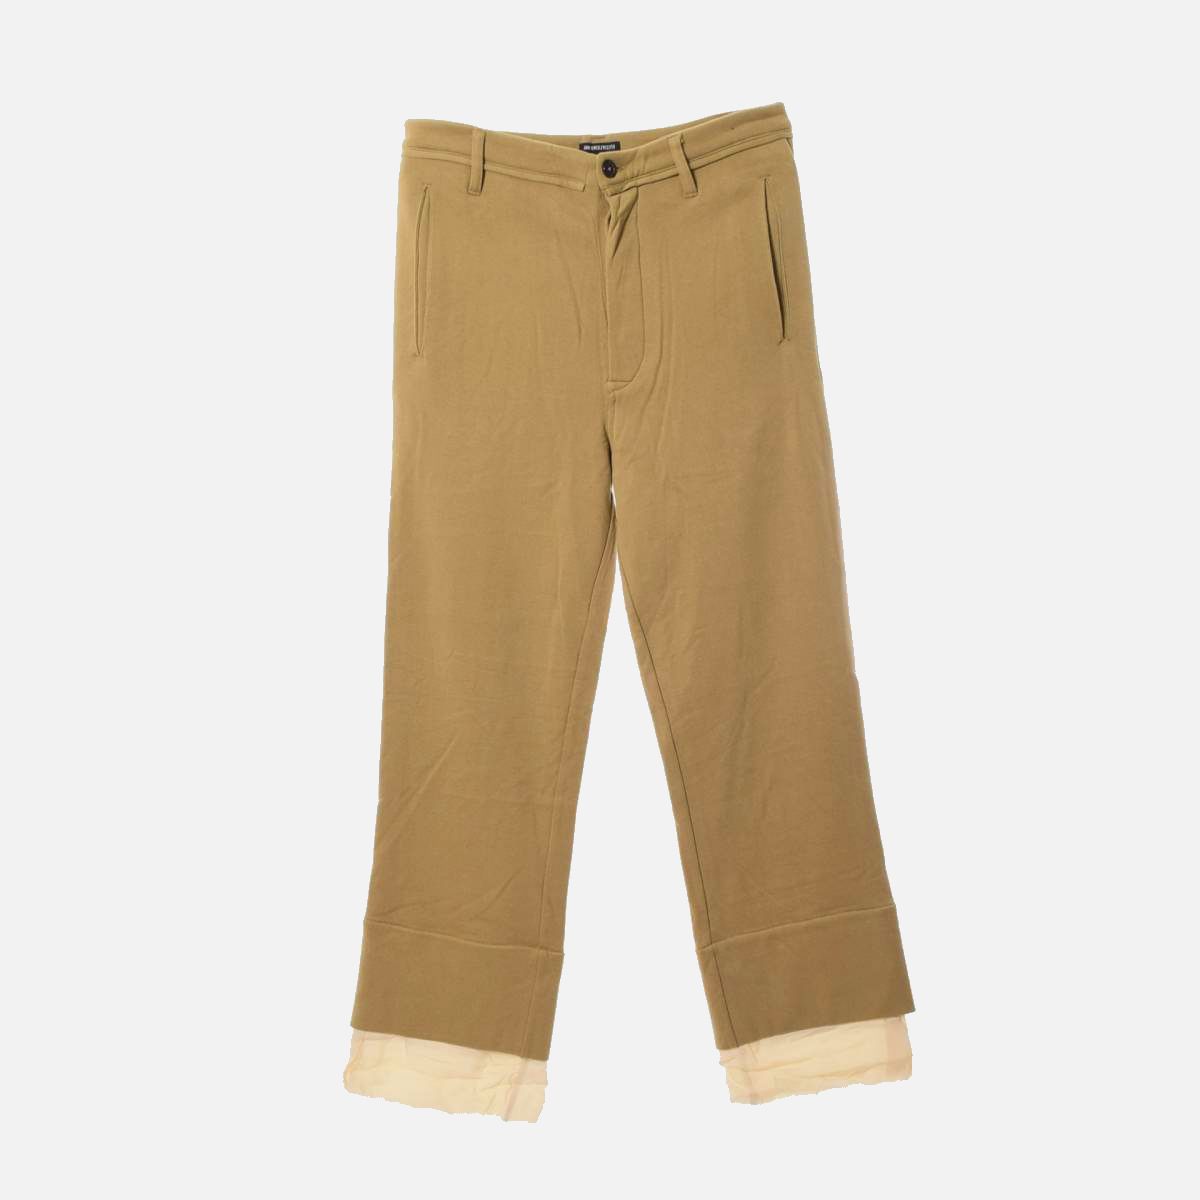 GRIMM SEPIA TROUSERS